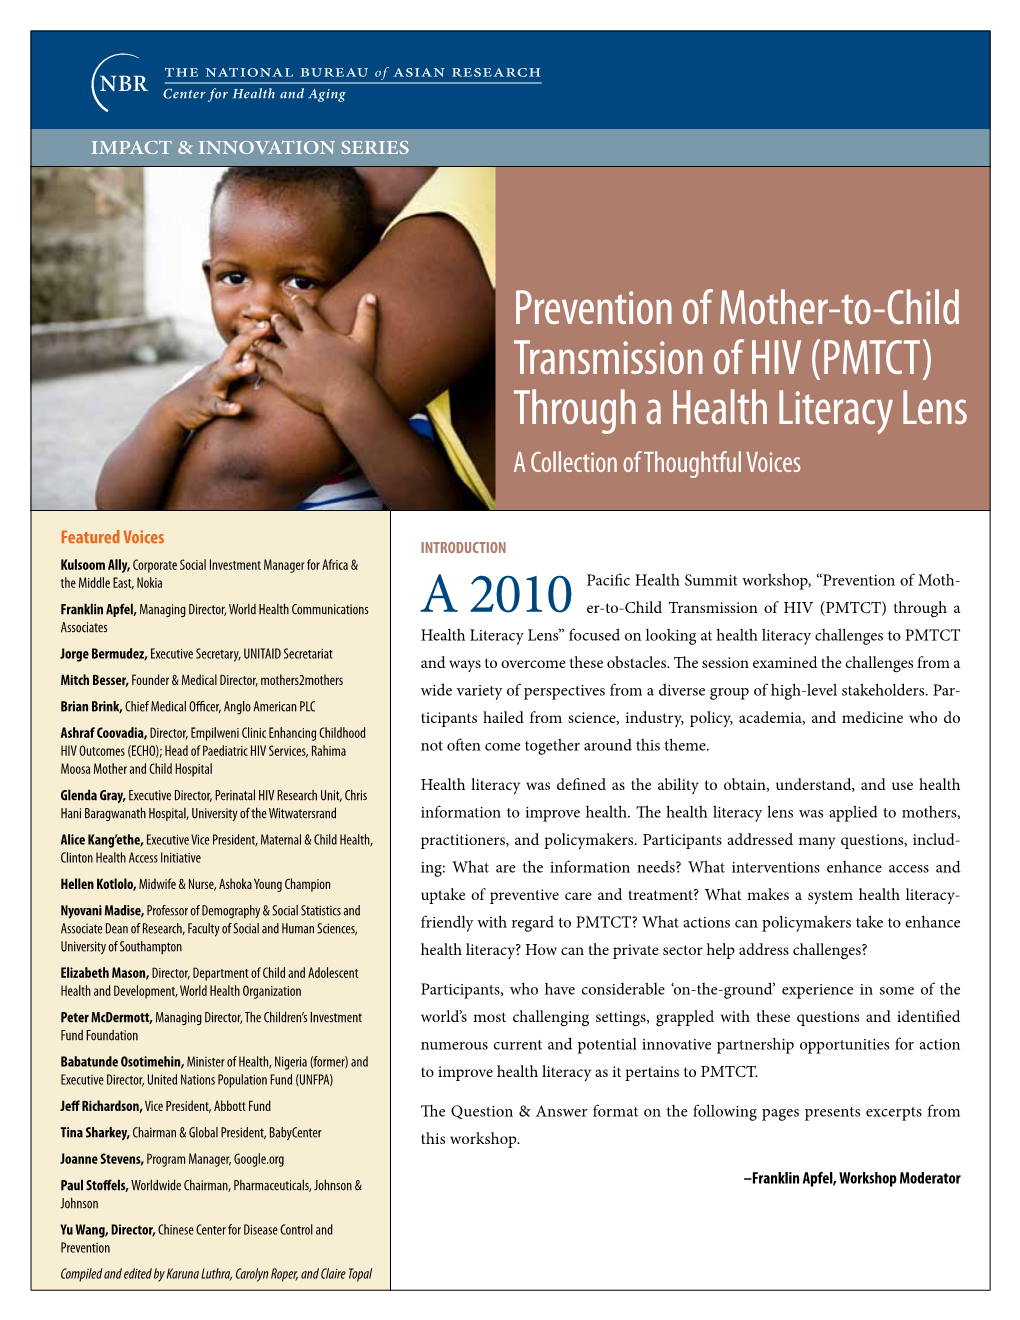 Prevention of Mother-To-Child Transmission of HIV (PMTCT) Through a Health Literacy Lens a Collection of Thoughtful Voices